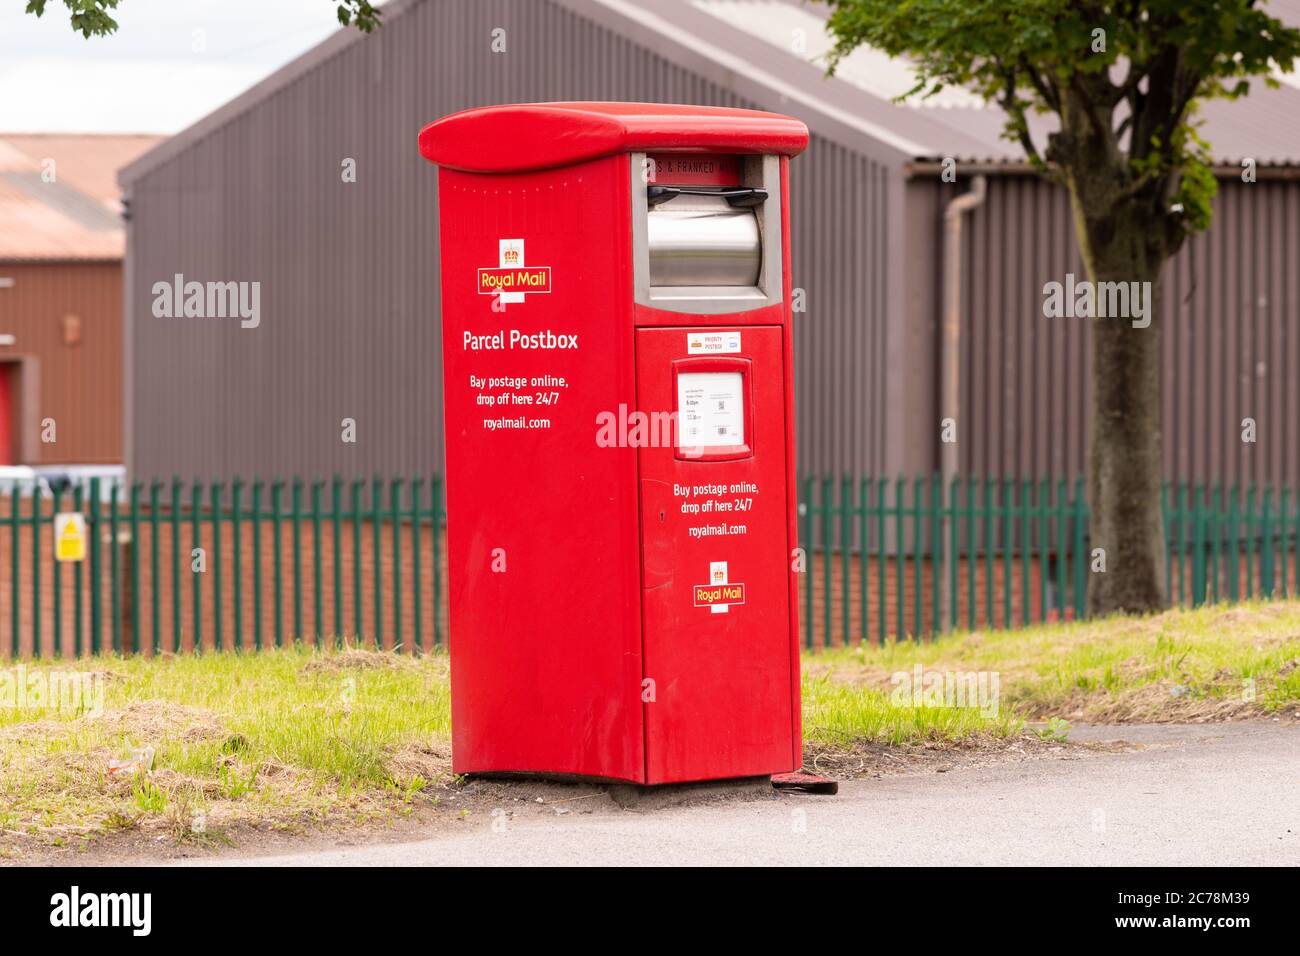 Parcel postboxes royal mail locations